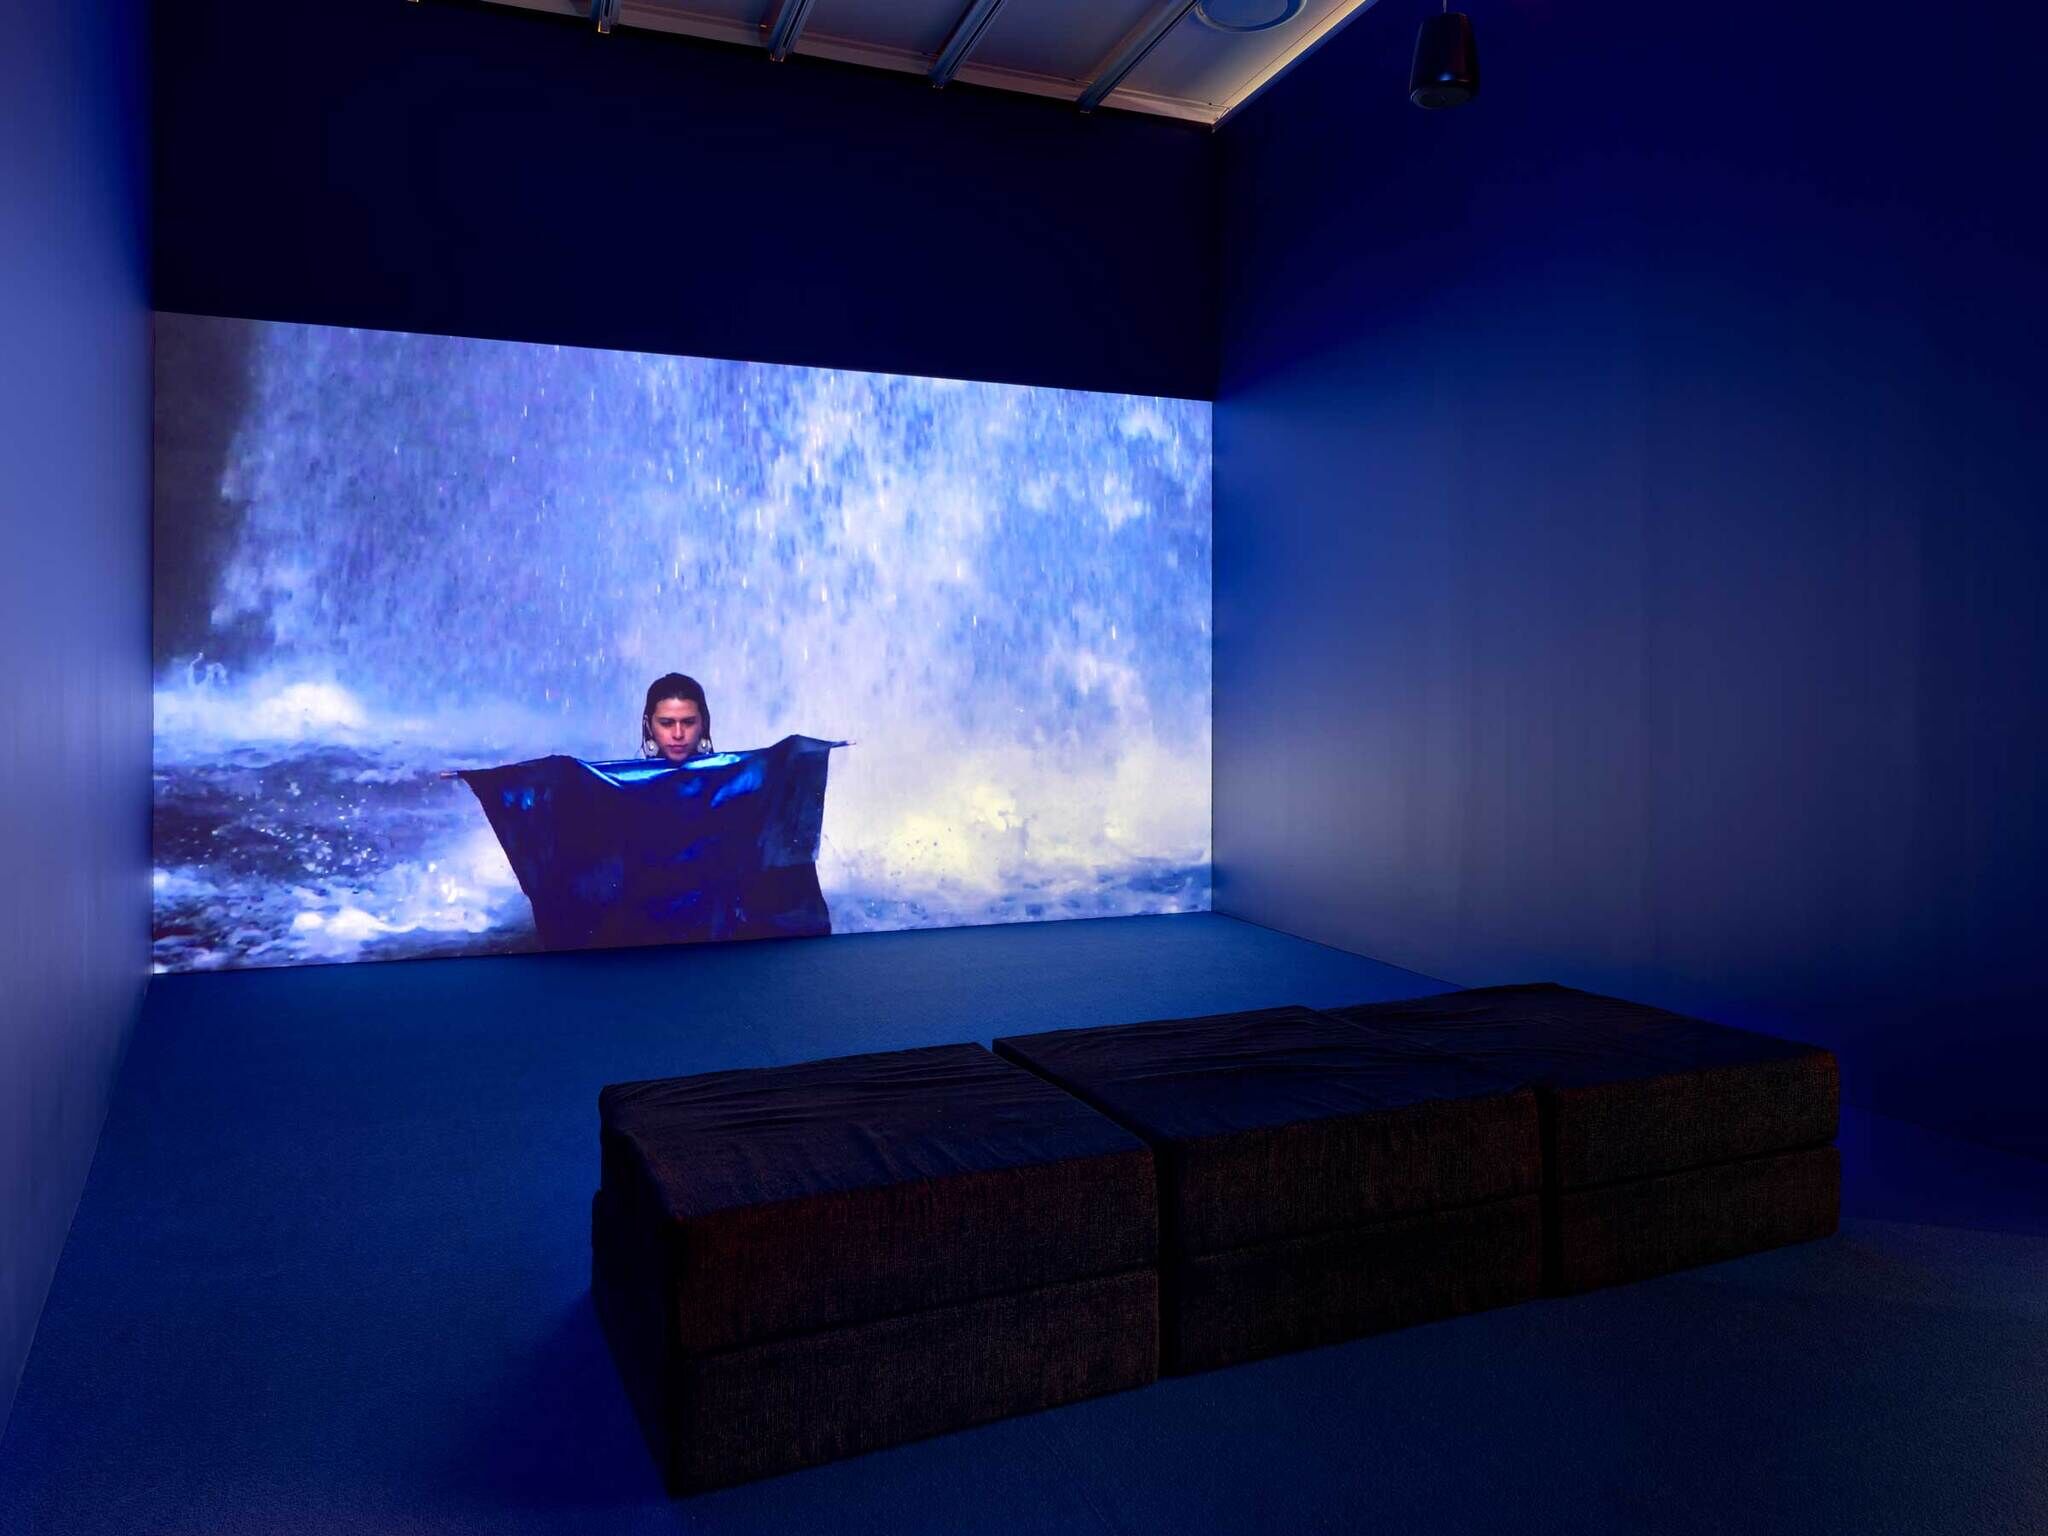 A person emerges from a blue tarp in front of a large video screen displaying a waterfall, with dark cushions on the floor.